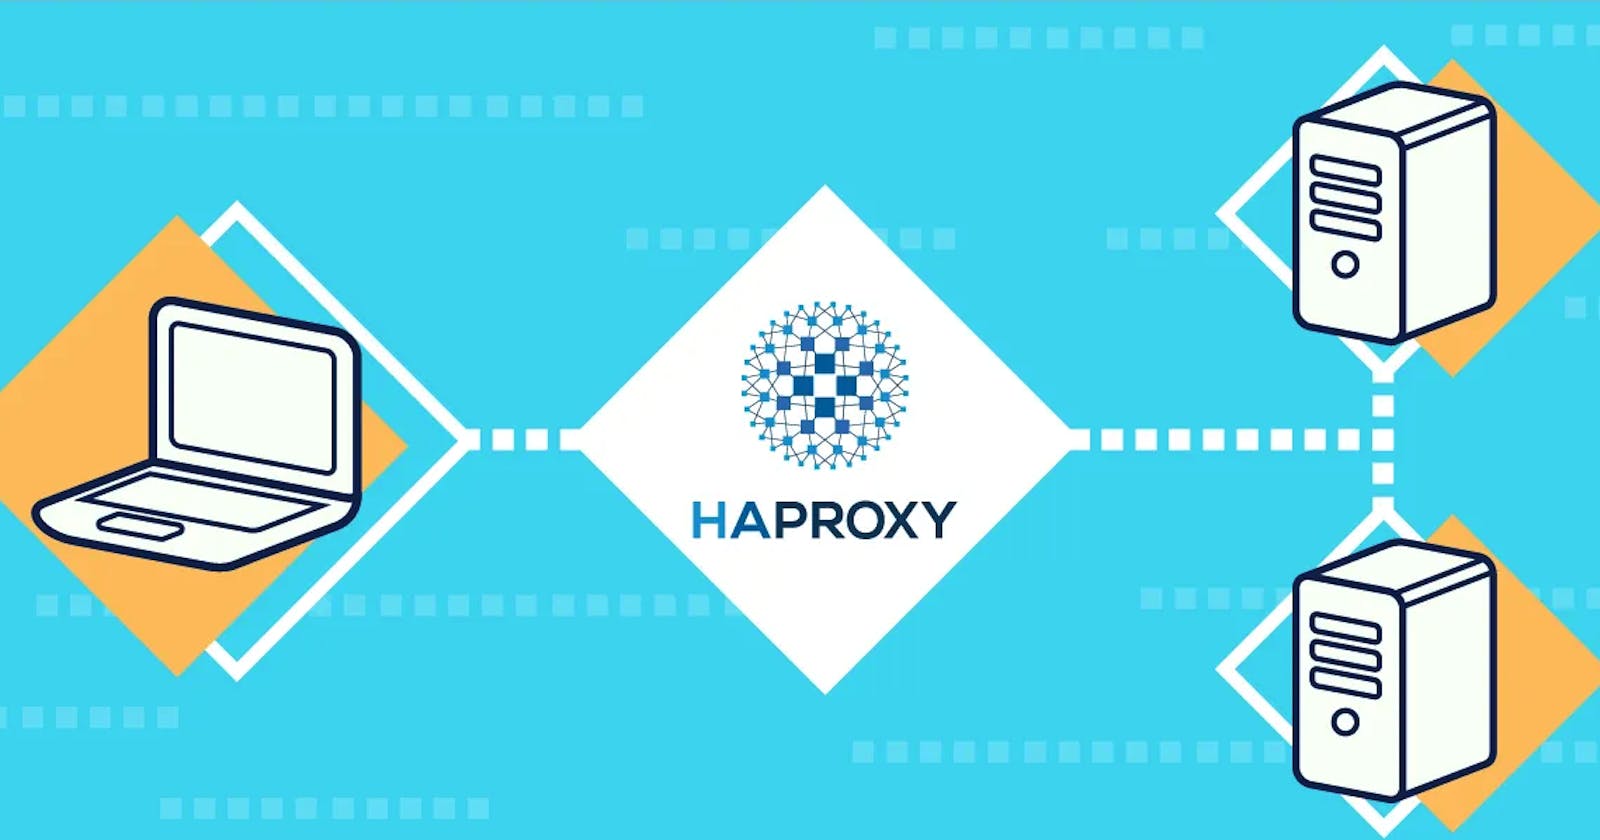 Making a Simple Load-Balancer with HaProxy